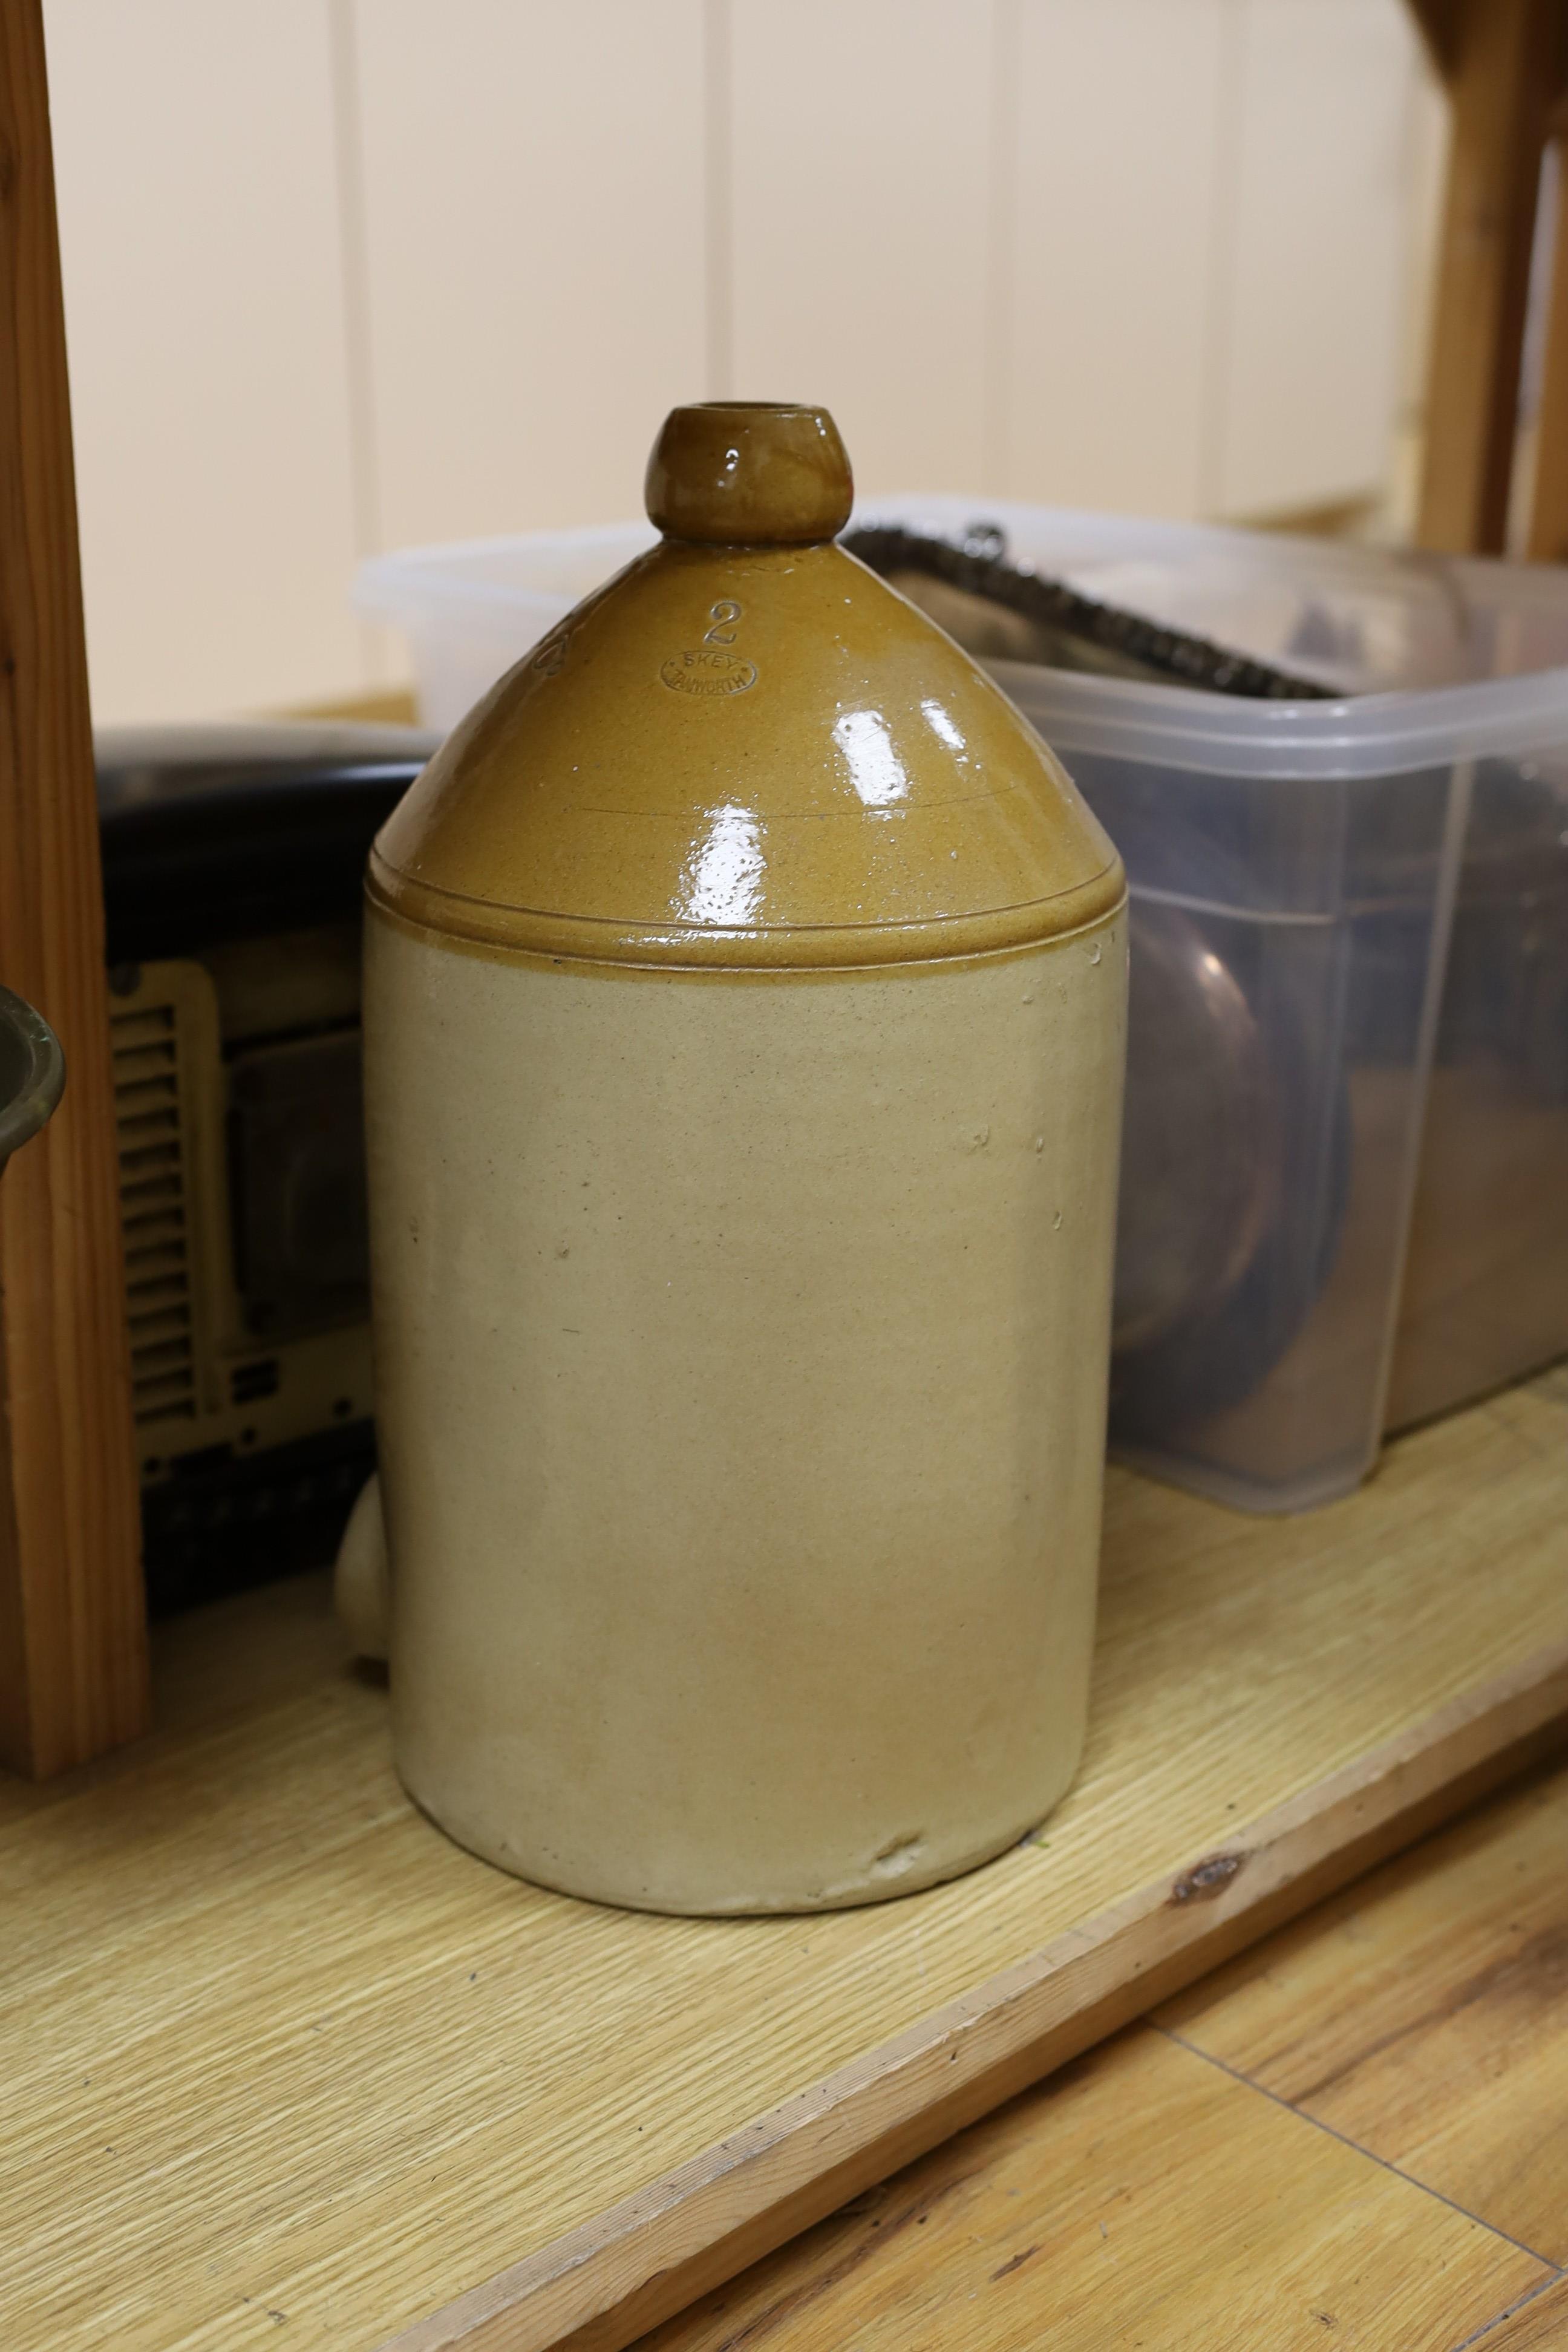 A 1930's HMV bakelite electric heater, A Mattocks cast iron weighing scale and a Lewes stoneware jar